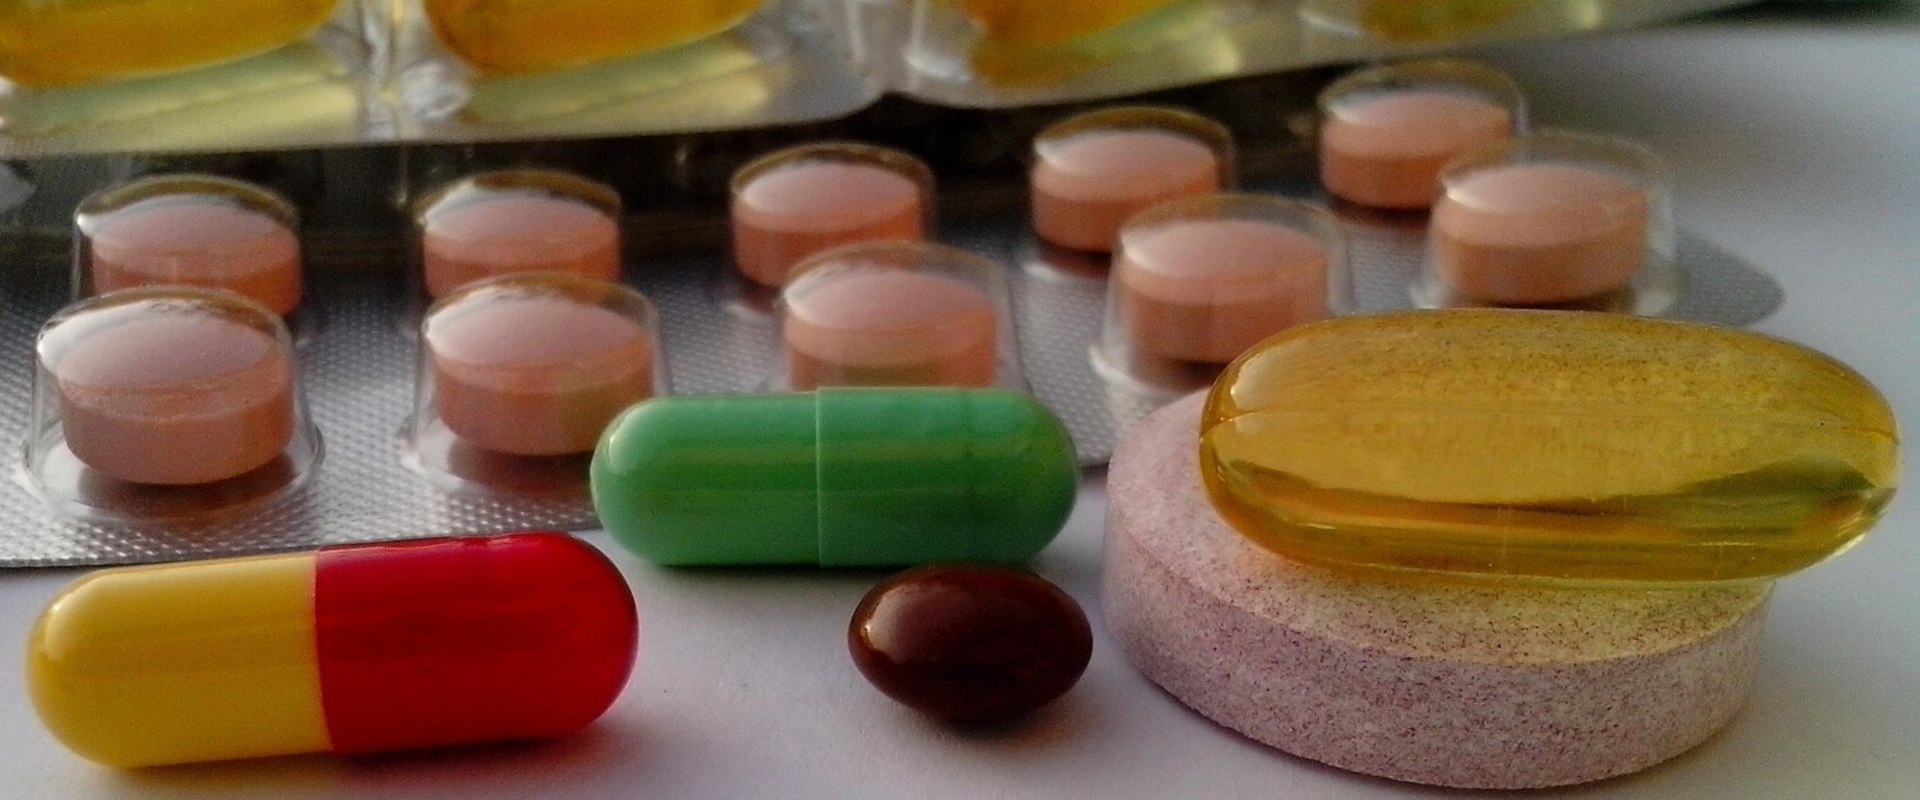 Can I Overdose on Vitamins and Supplements? - A Guide to Understanding the Risks